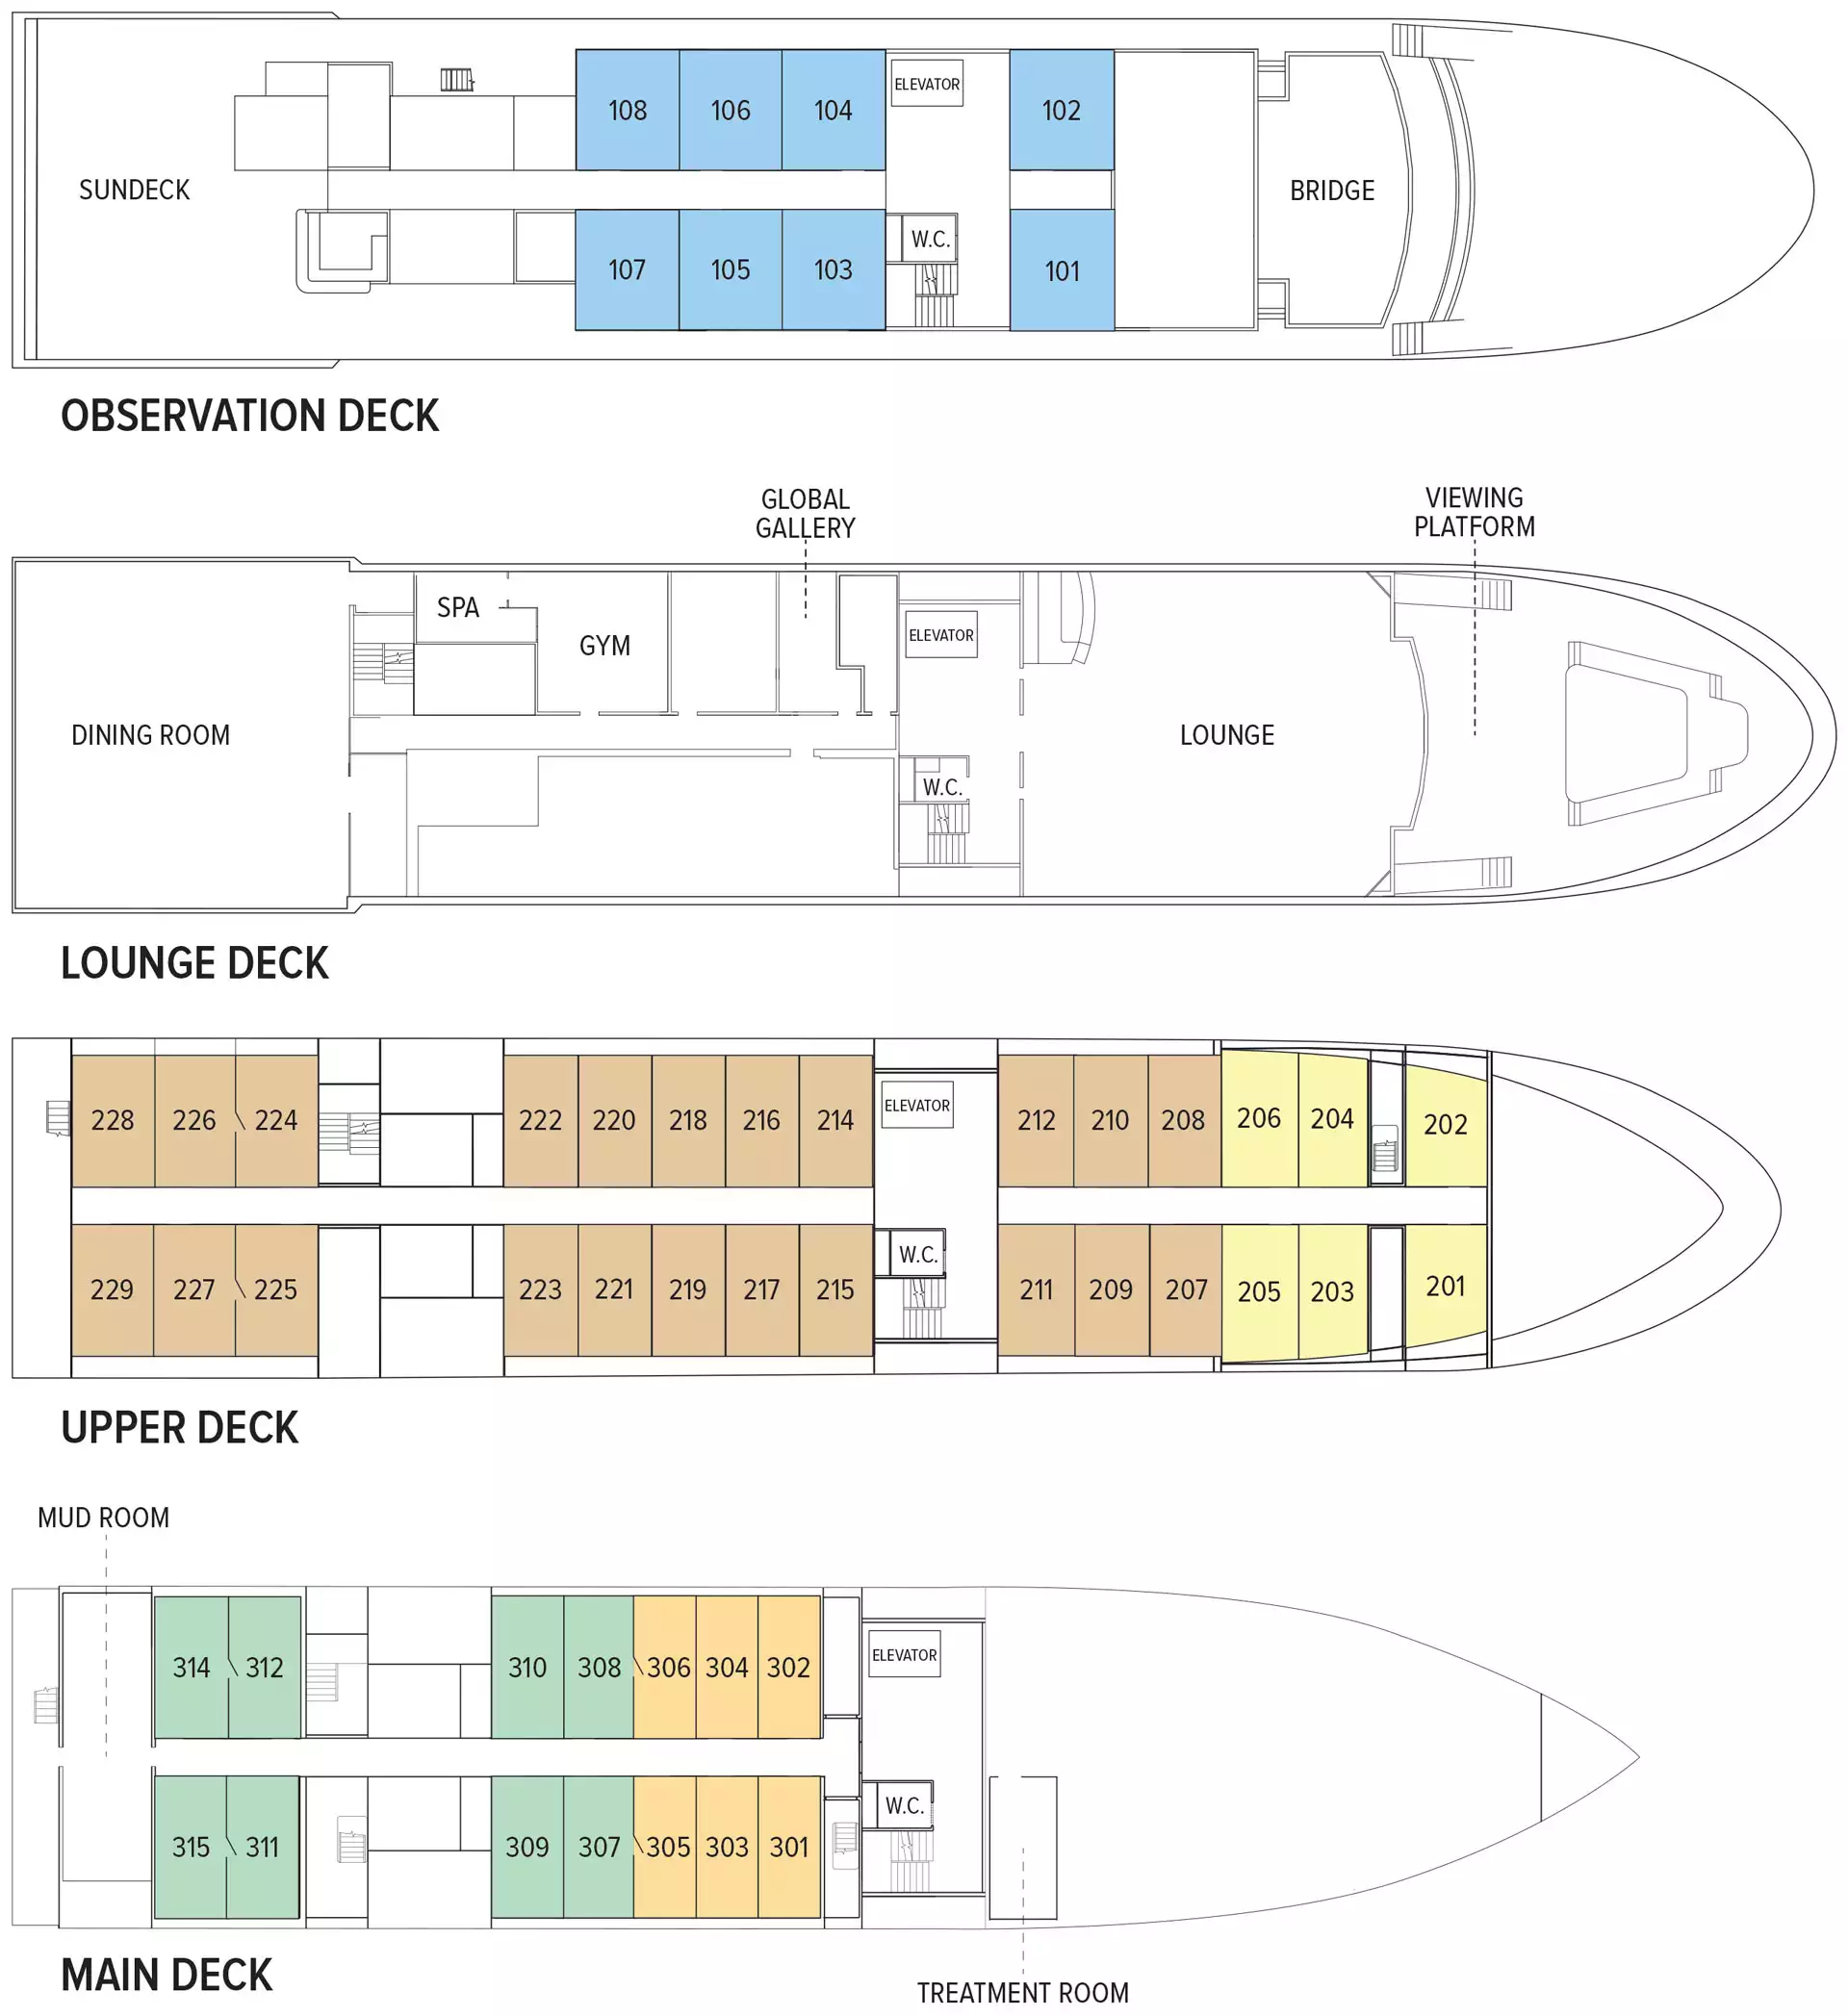 Deck plan detailing Main Deck, Upper Deck, Lounge Deck, and Observation Deck of National Geographic Venture & Nat Geo Quest expedition ships